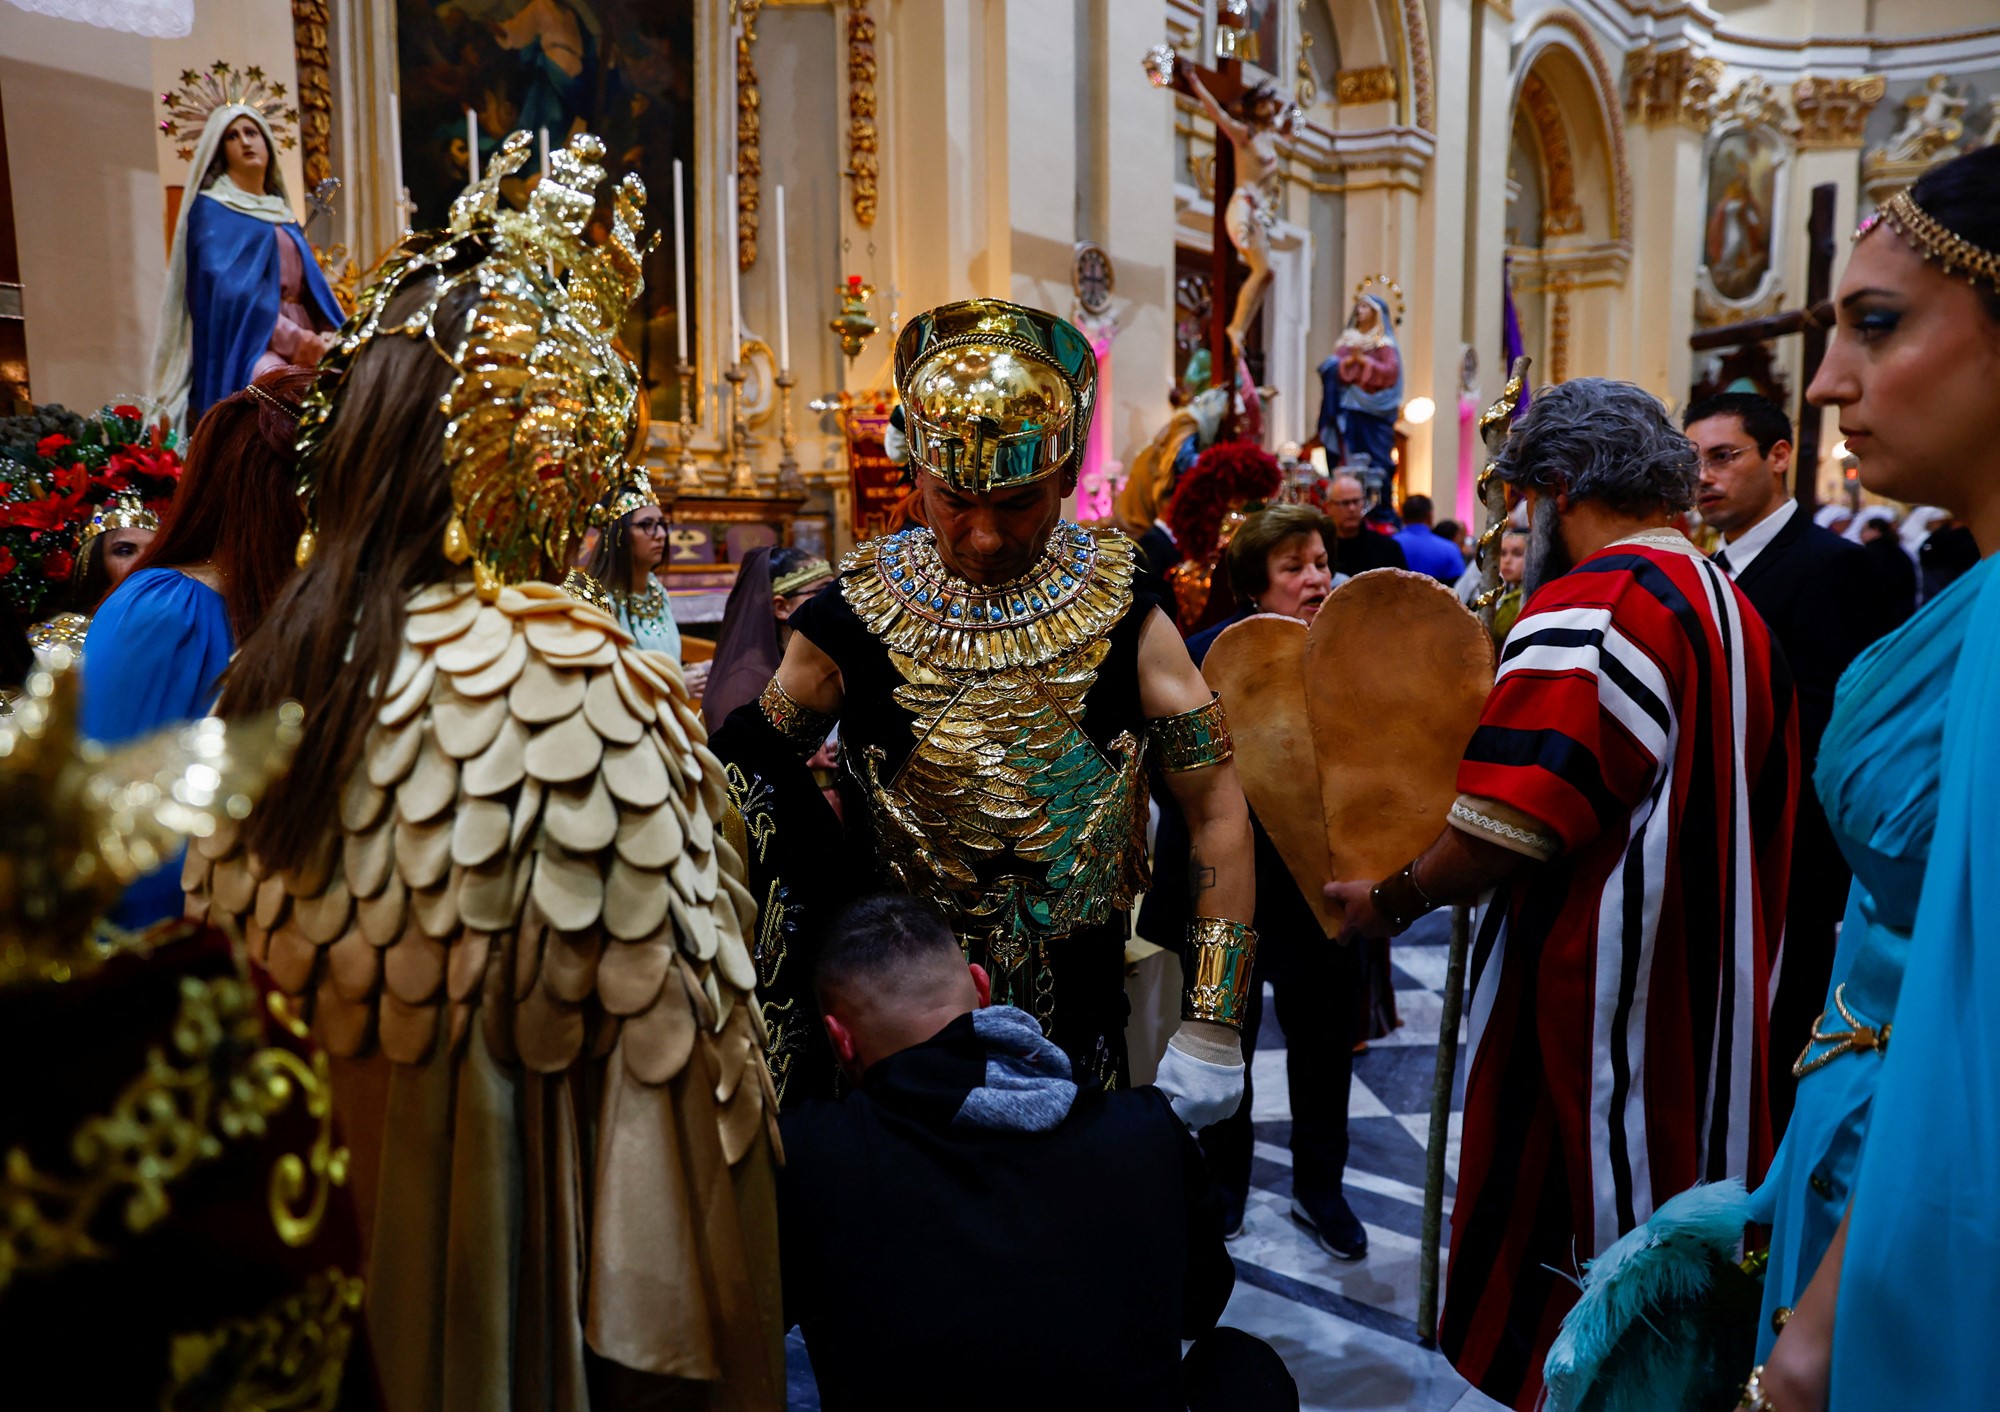 Two men dressed as Roman soldiers in gold armour stand amid a crowd in a church. 